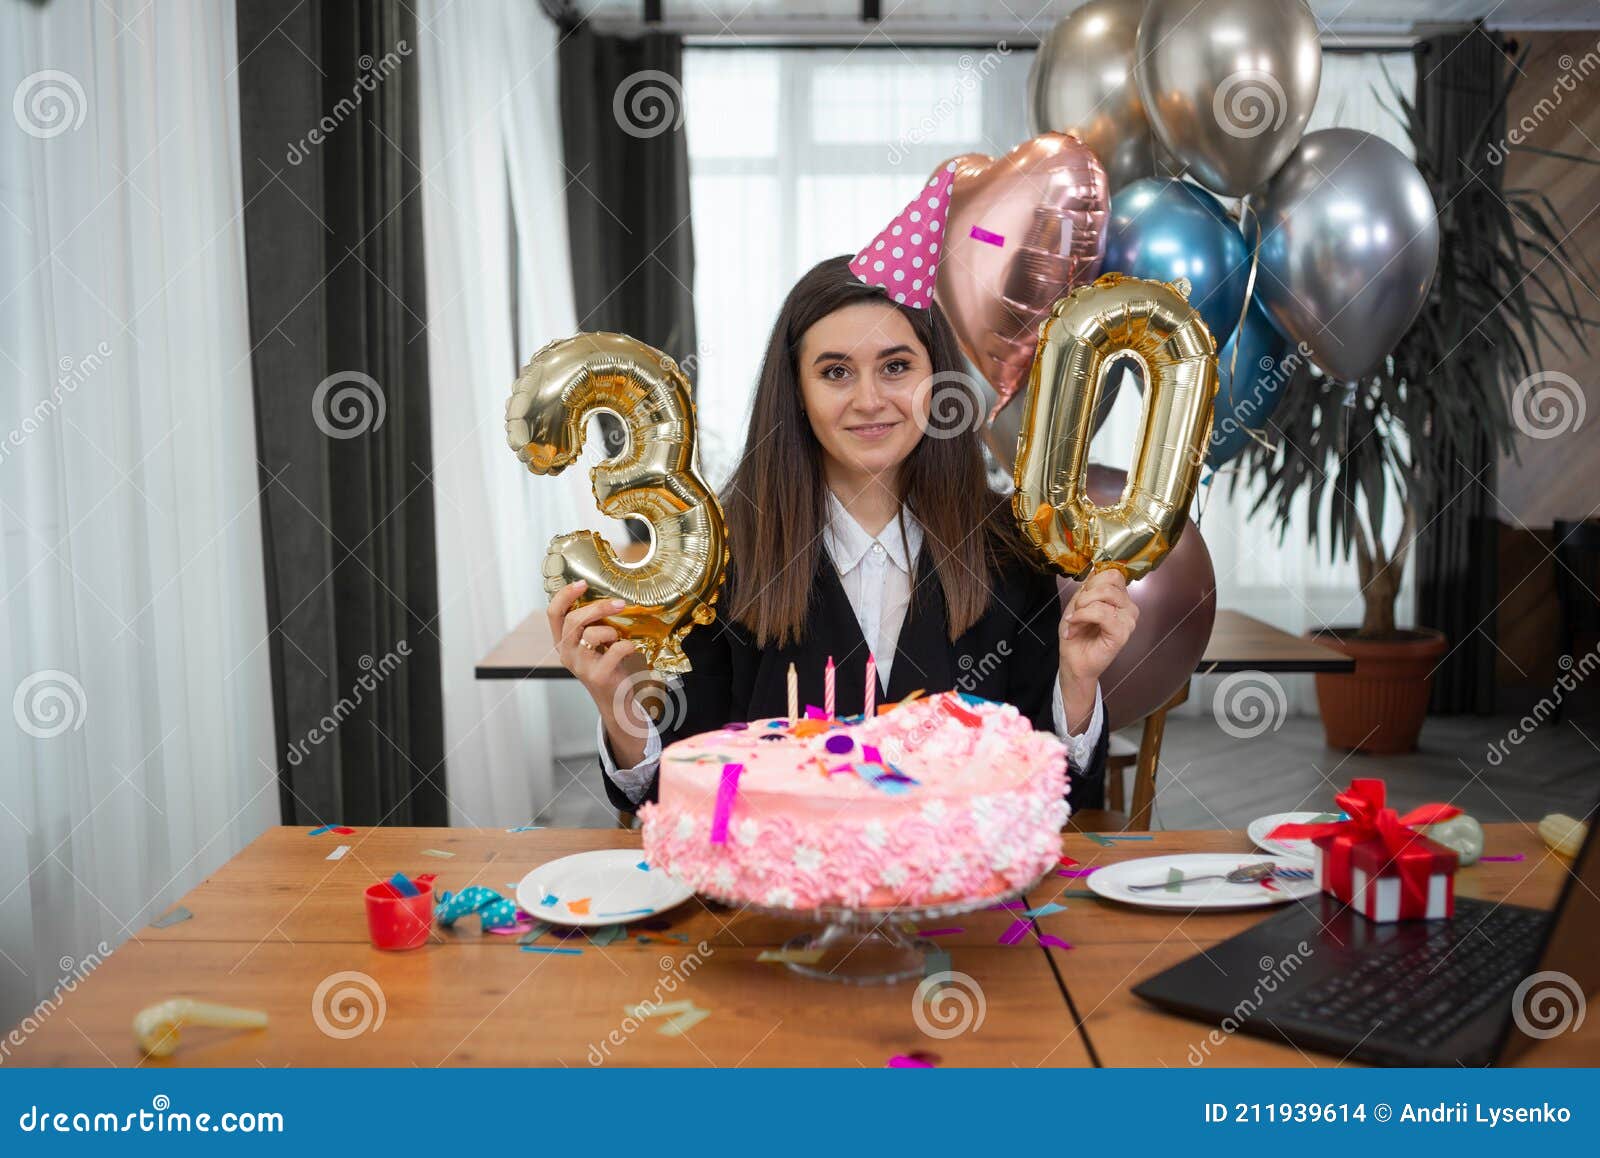 Portrait of Smiling Caucasian Woman Sitting at the Table, Birthday ...